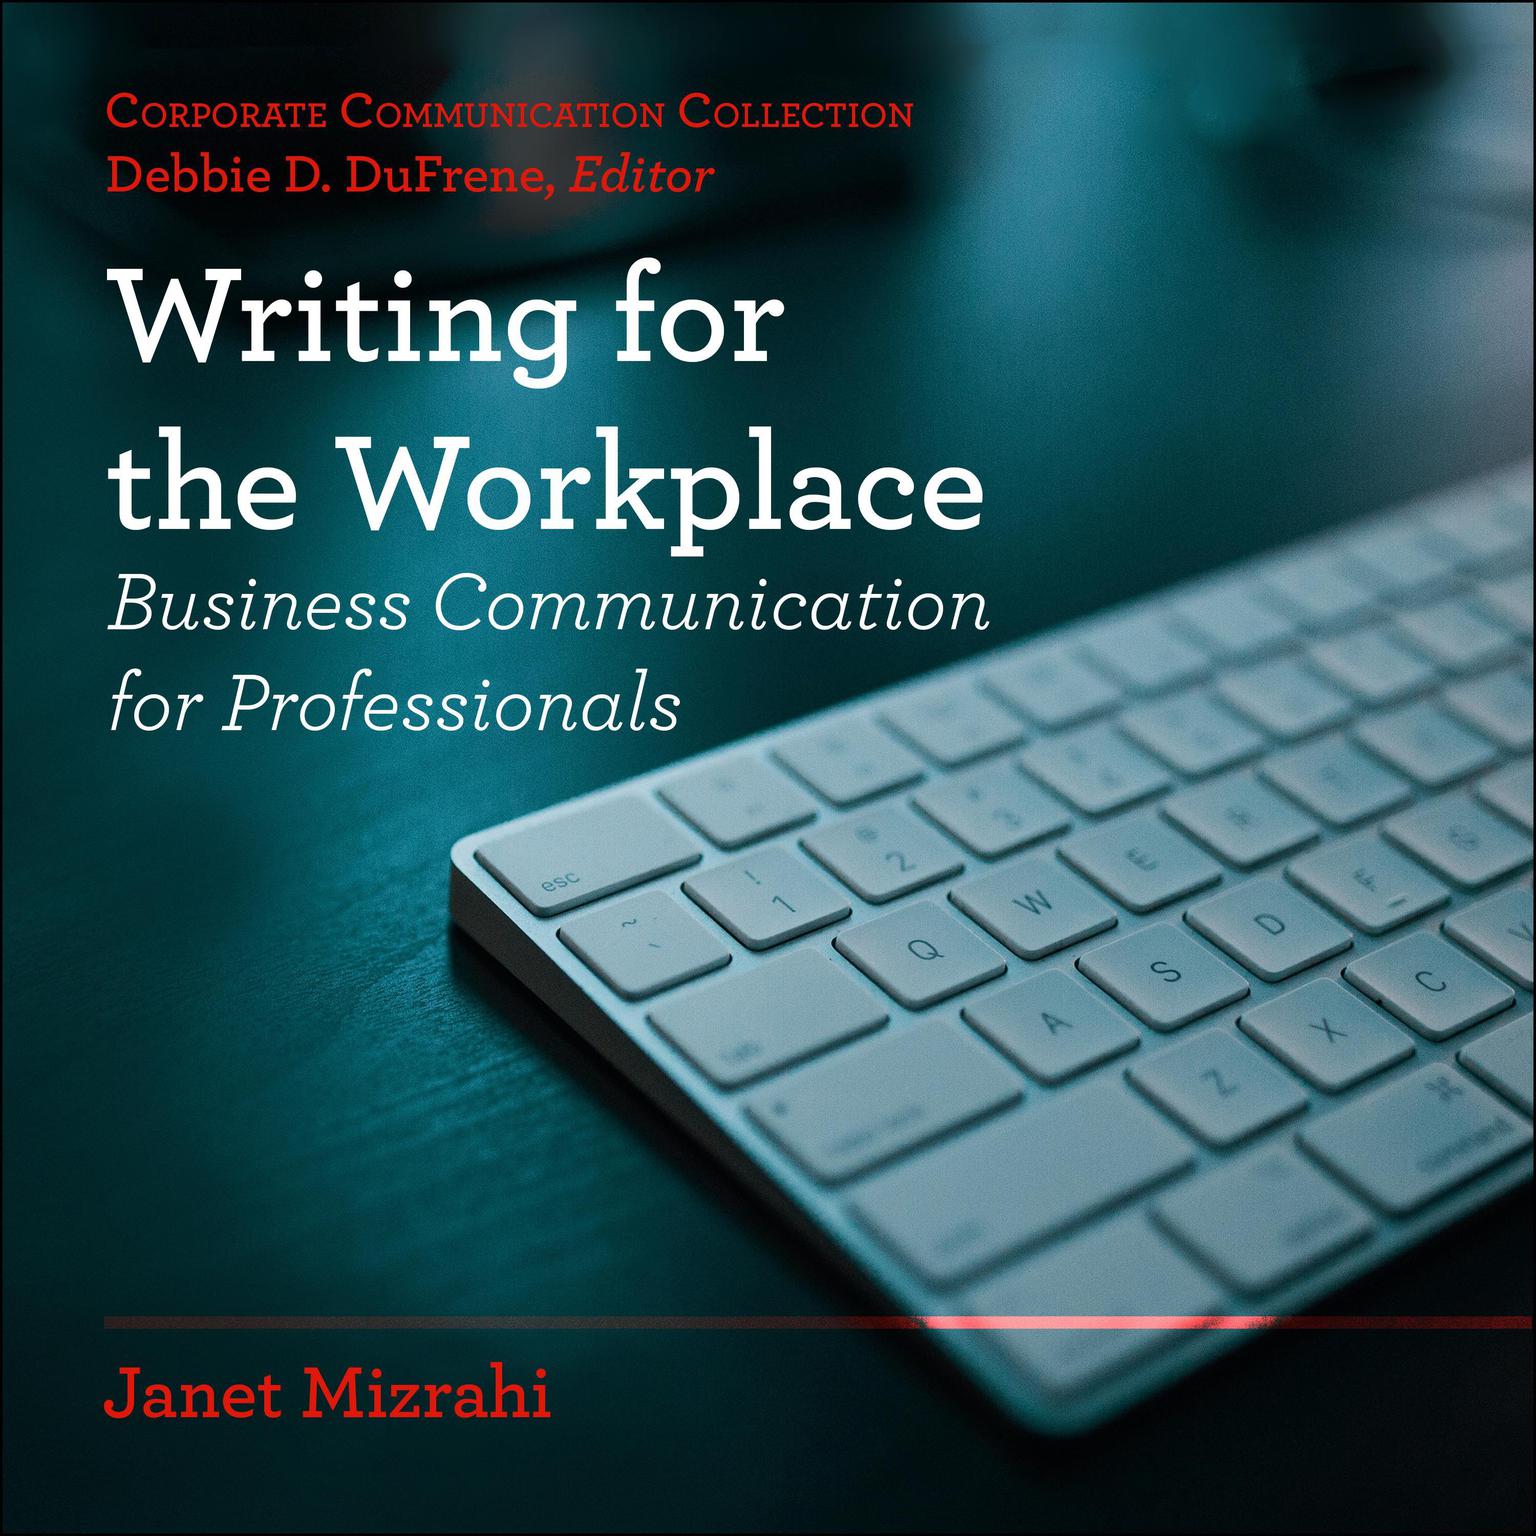 Writing for the Workplace: Business Communication for Professionals Audiobook, by Janet Mizrahi